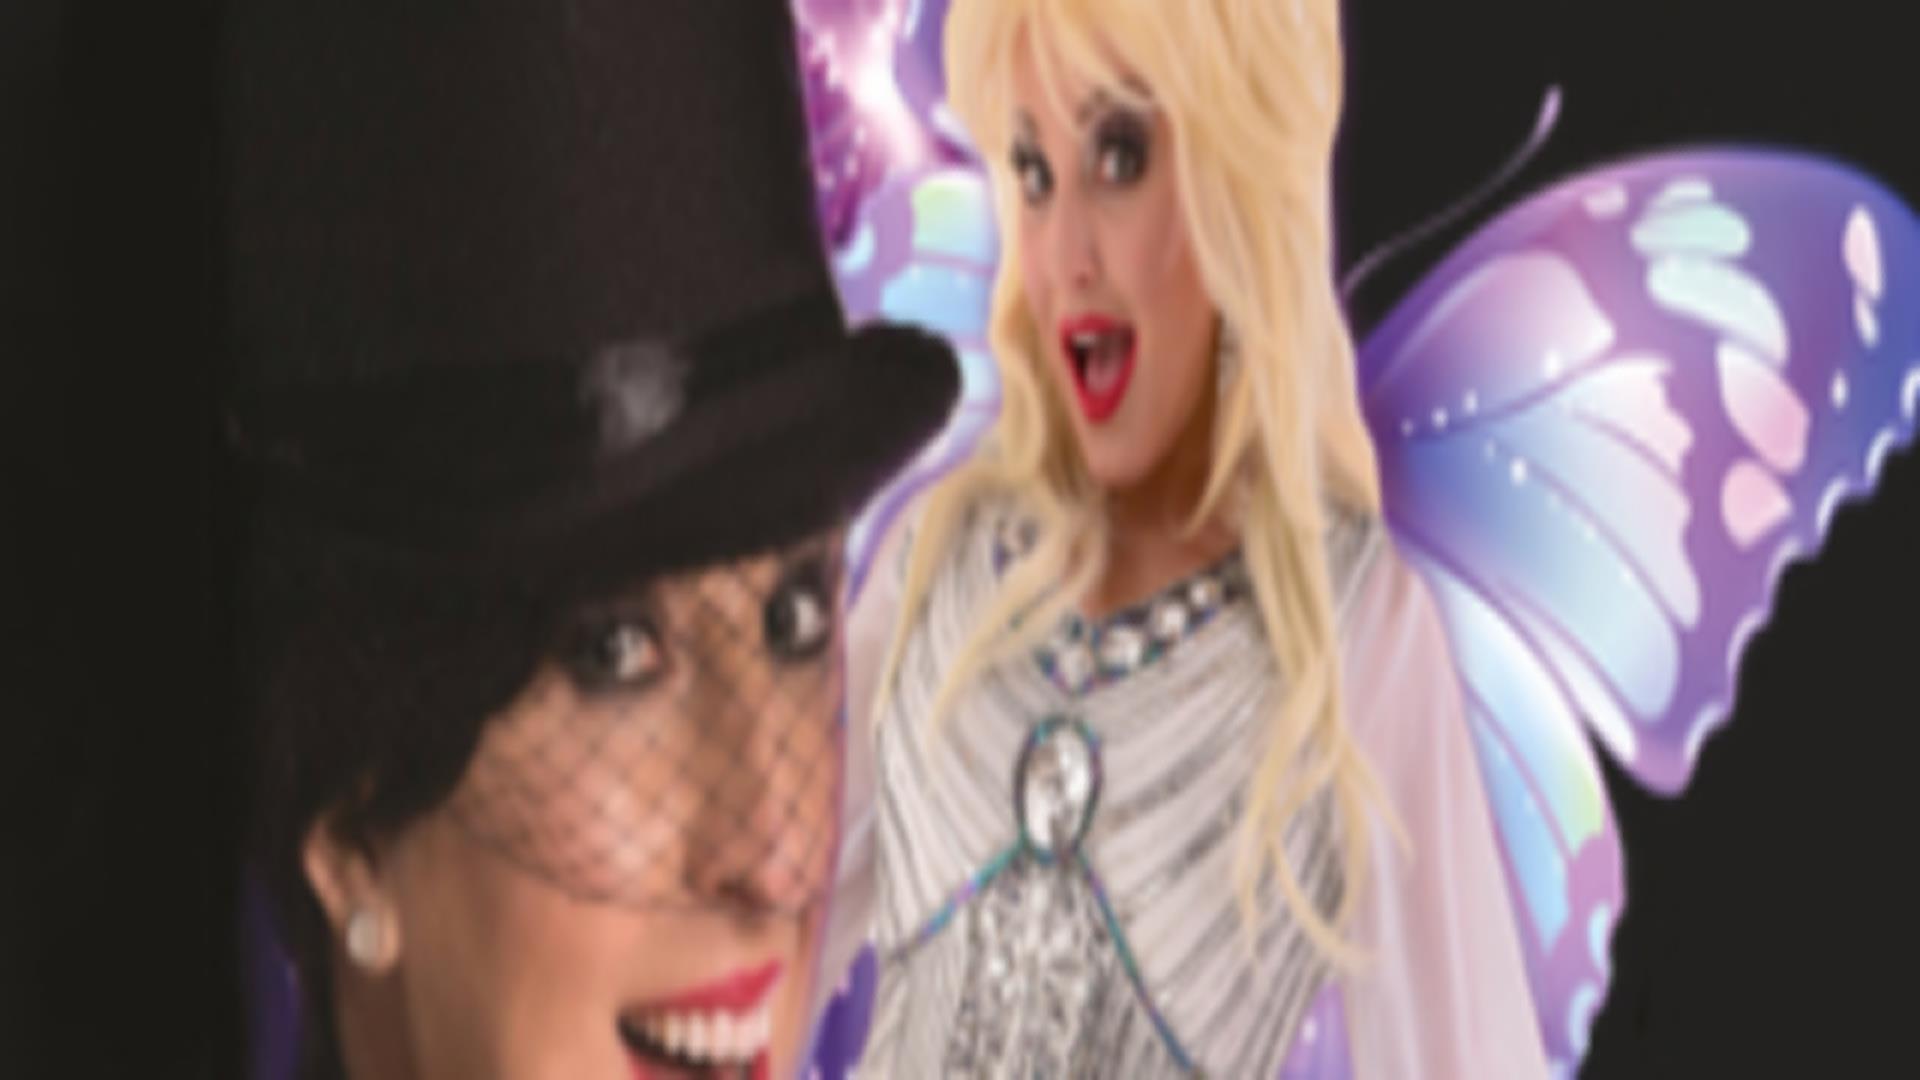 Dolly Parton & Shania Twain Tribute Show promotional image.